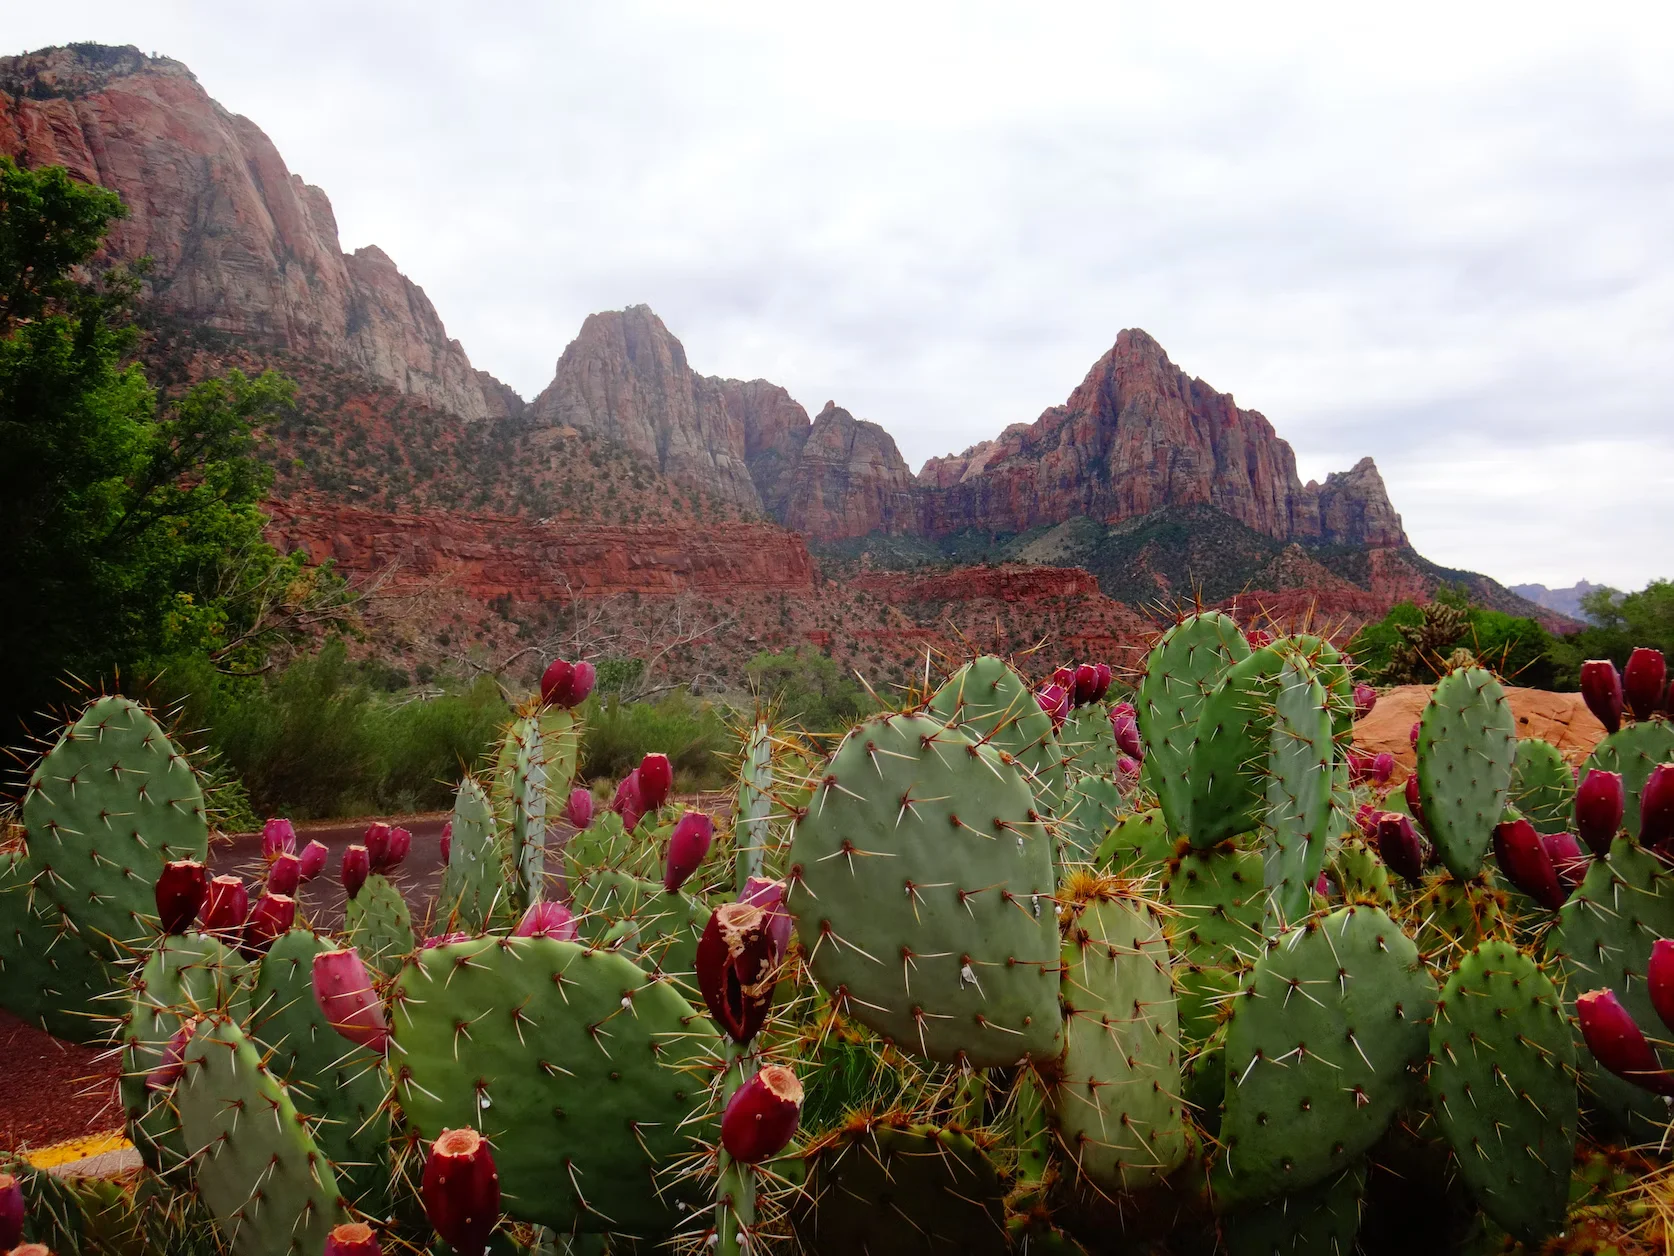 Cacti in Zion National Park, Utah. Image by George P.